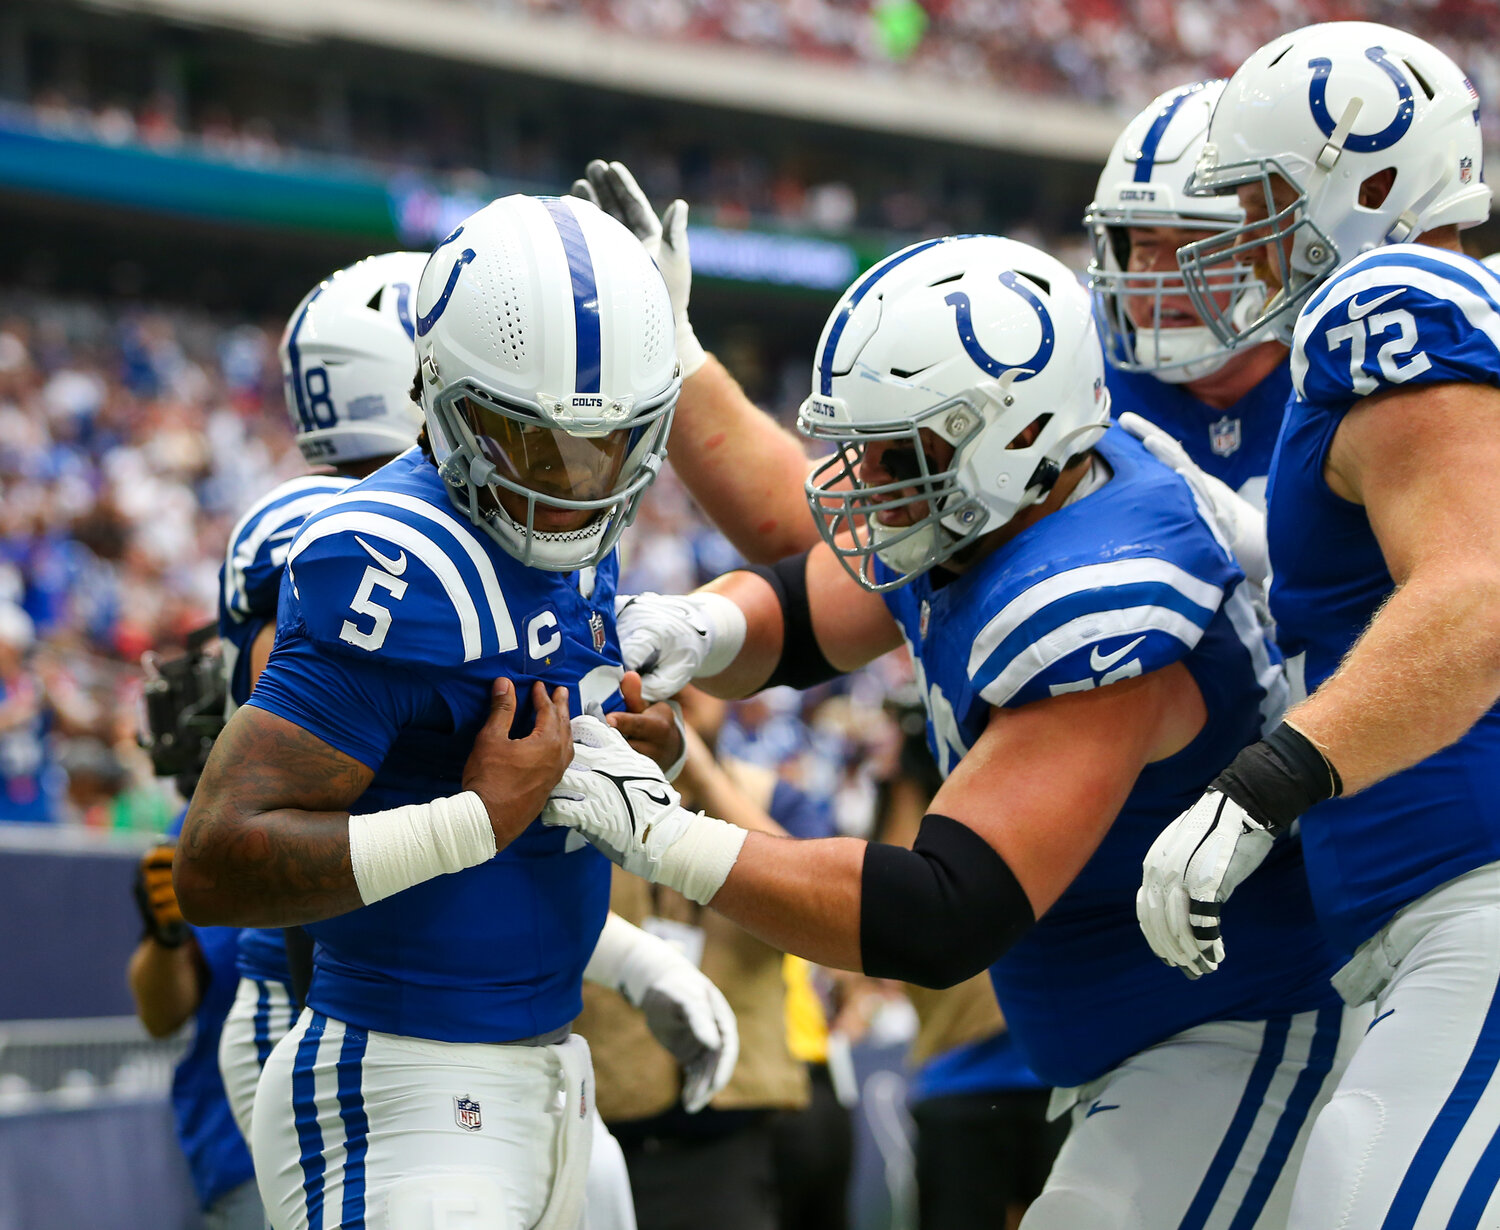 Colts quarterback Anthony Richardson (5) celebrates after a 15-yard touchdown run during an NFL game between the Texans and the Colts on September 17, 2023 in Houston. The Colts won, 31-20.